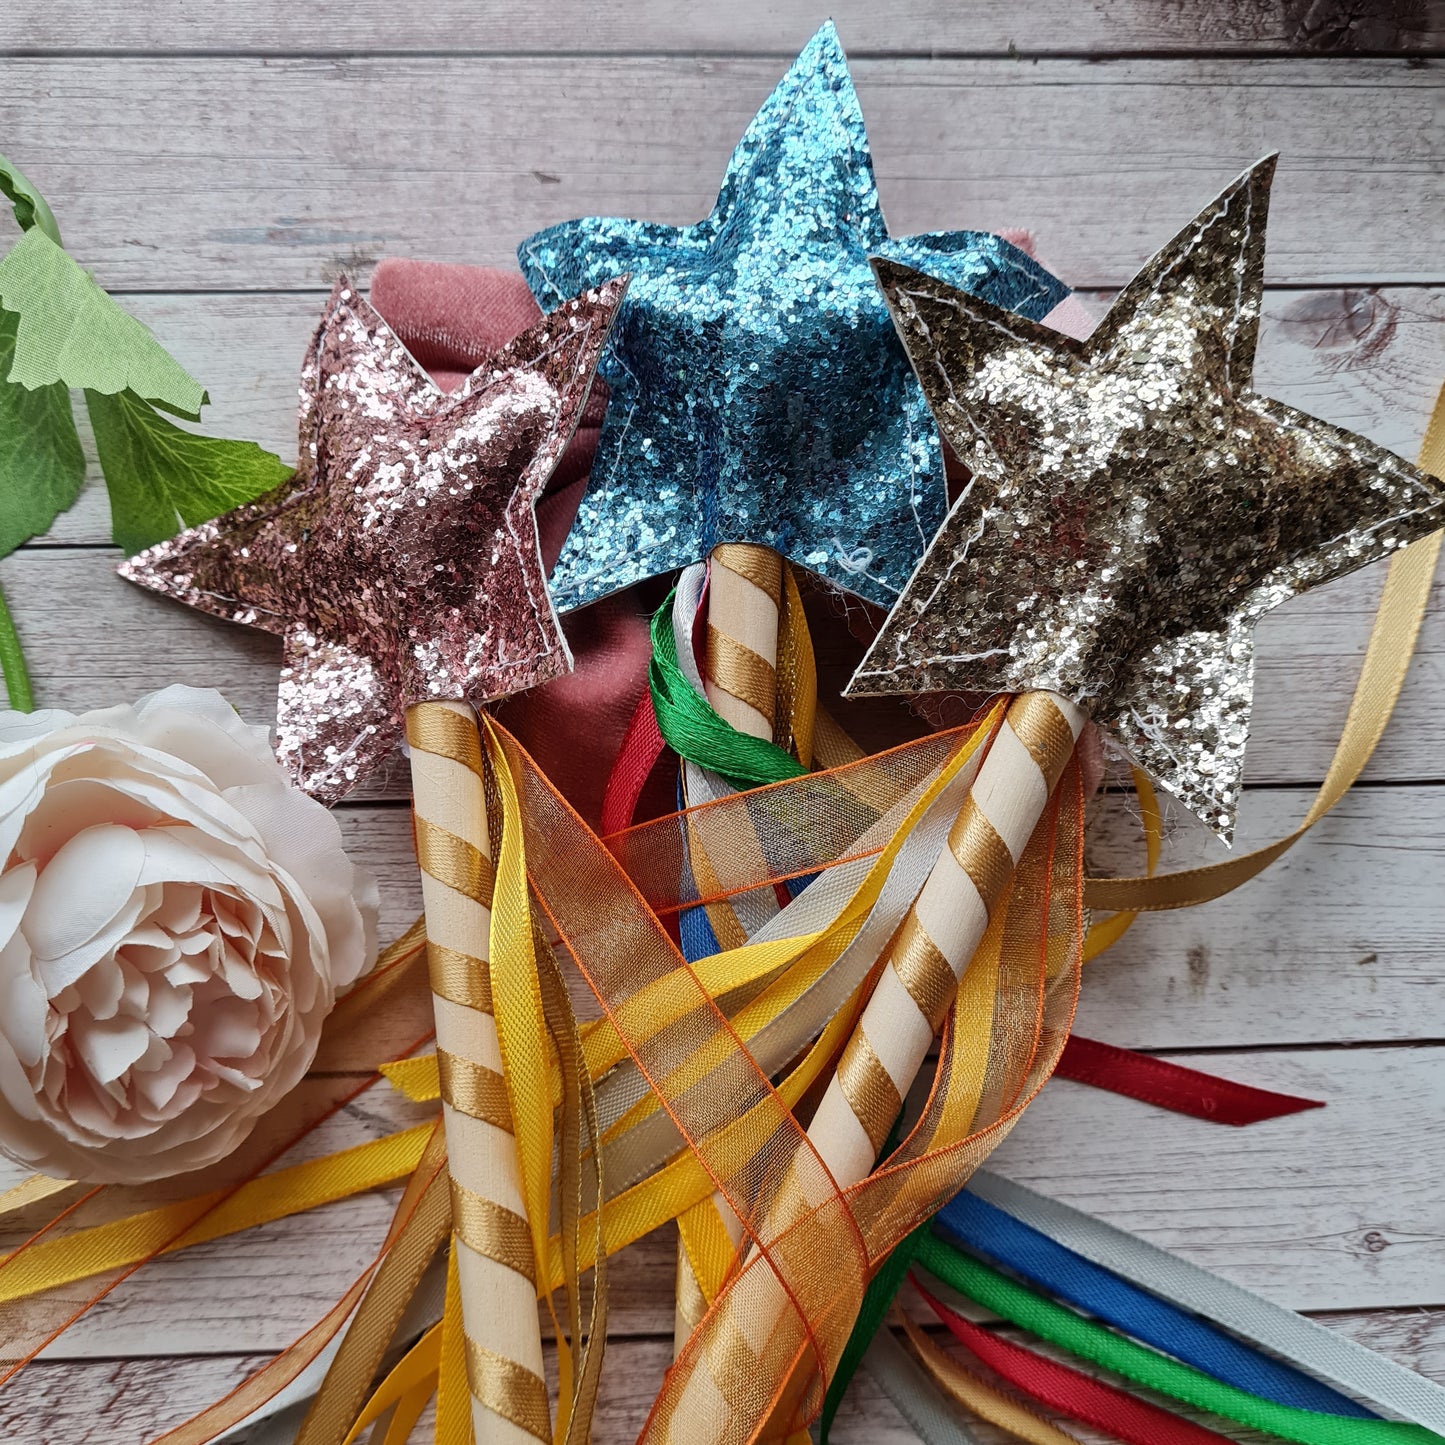 Children's magical fairy witch wands for magical play dress up